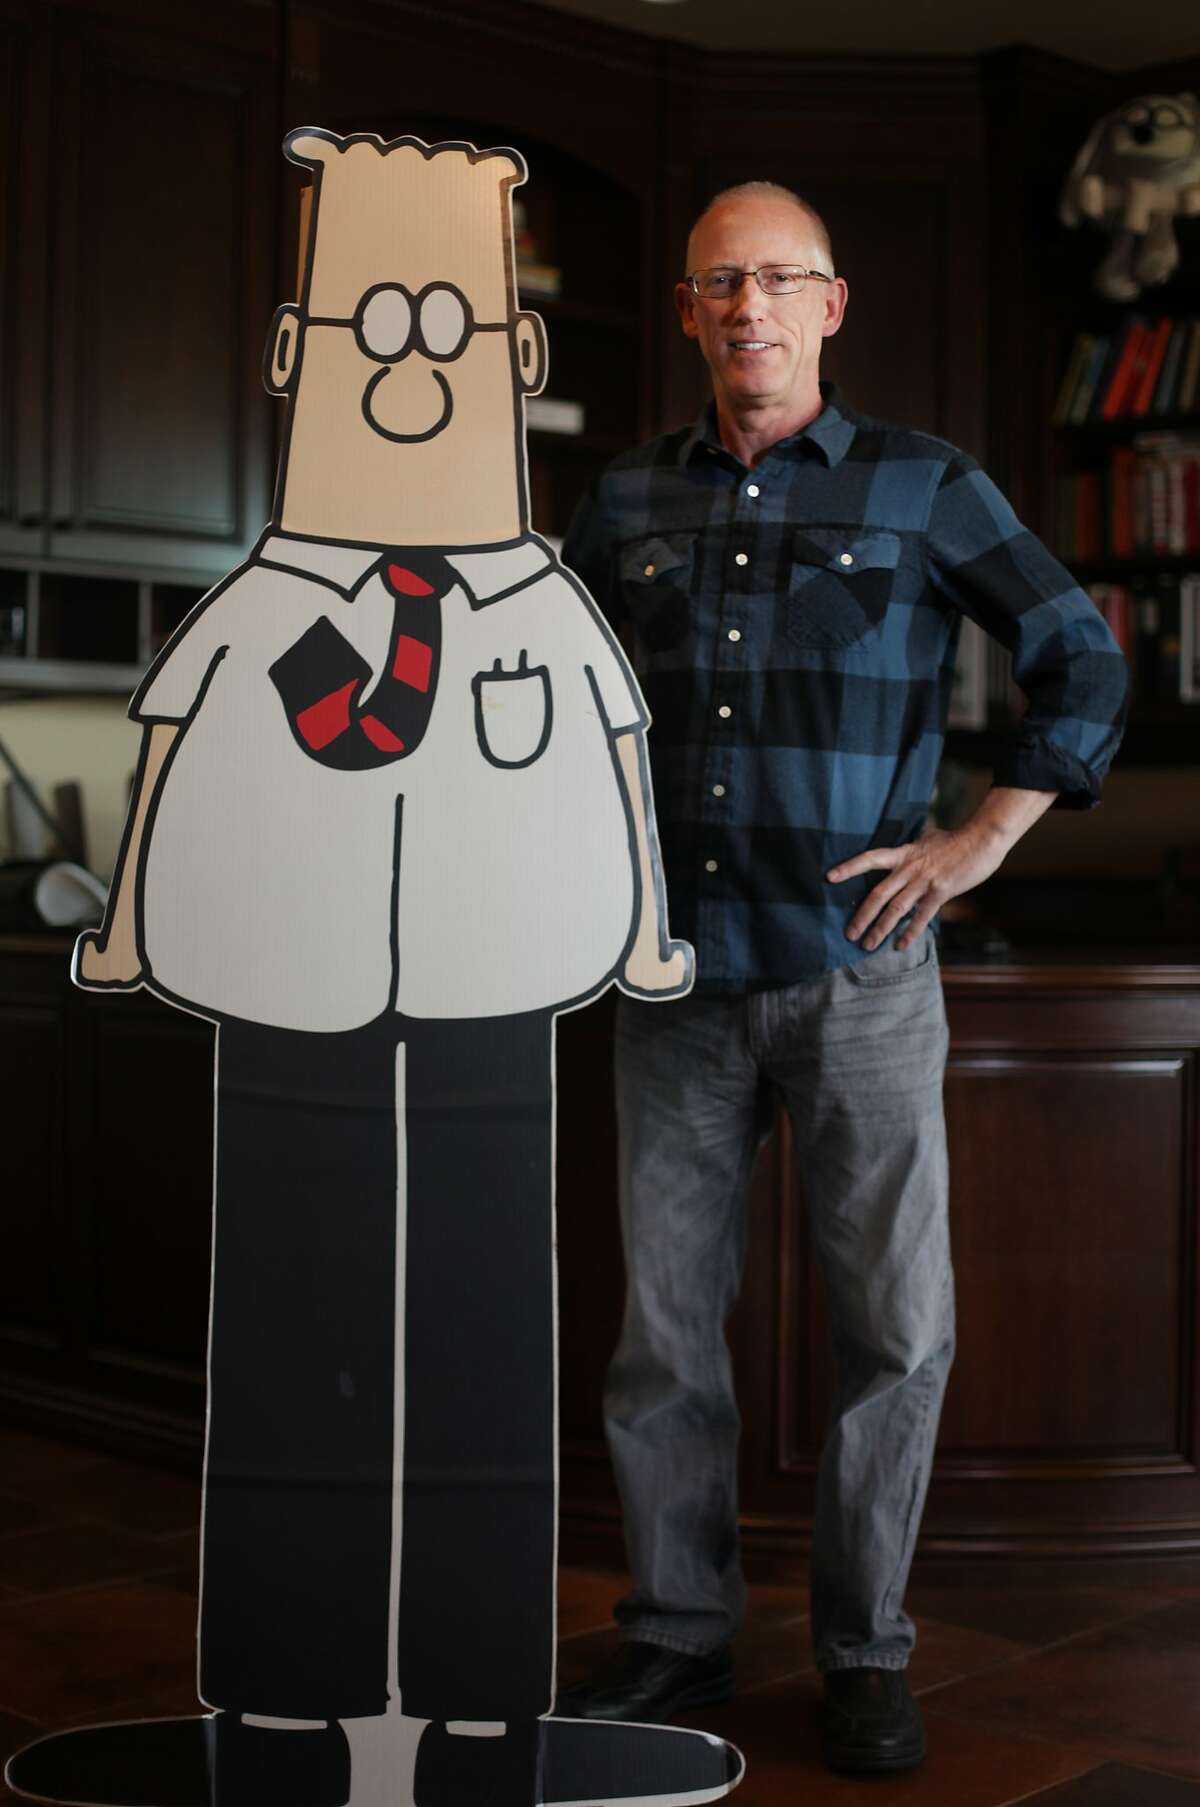 Scott Adams, cartoonist and author and creator of "Dilbert", poses for a portrait with a life-sized Dilbert cutout in his home office on Monday, January 6, 2014 in Pleasanton, Calif. Adams has published a new memoir "How to Fail at Almost Everything and Still Win Big: Kind of the Story of My Life".